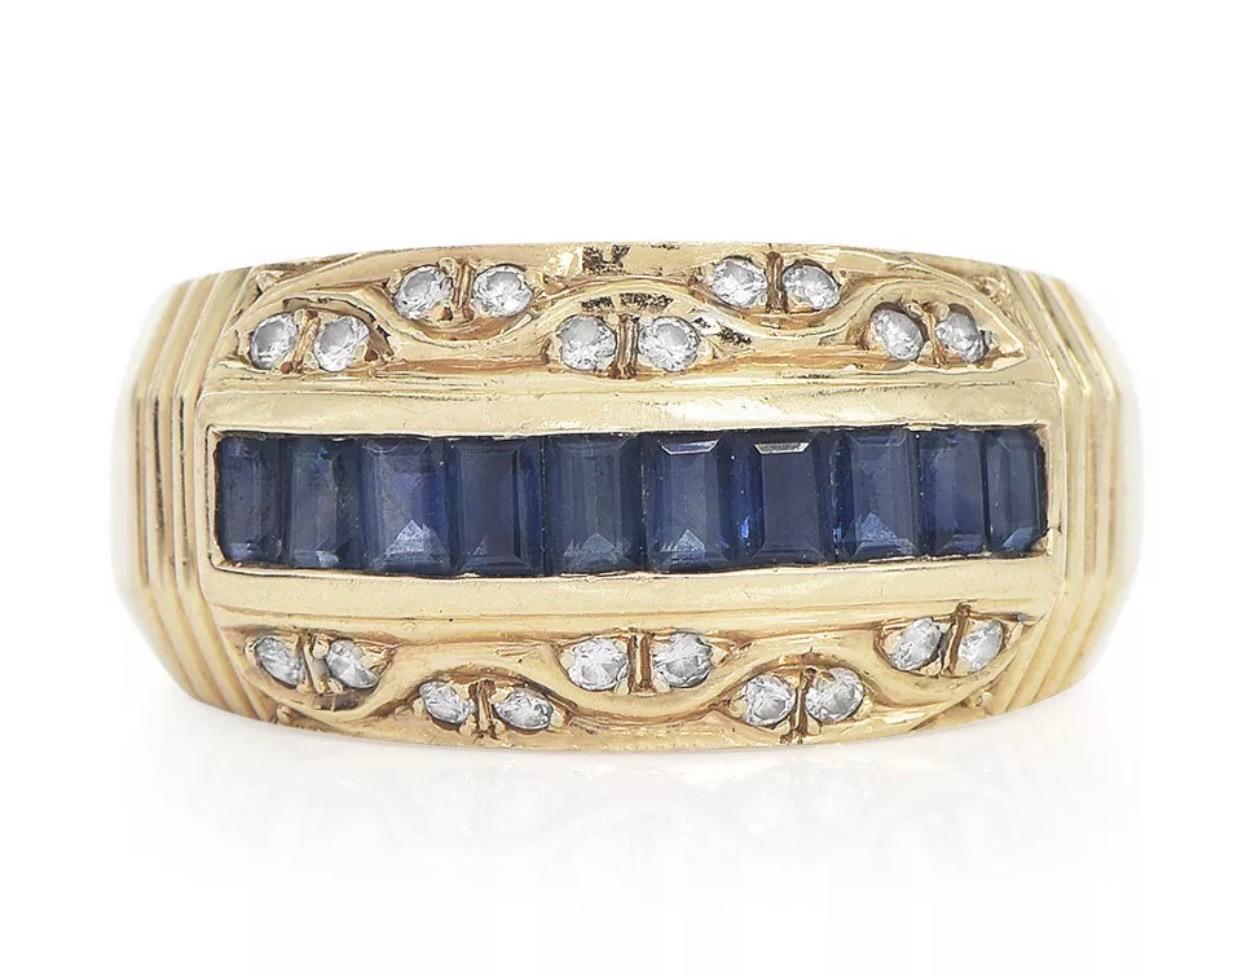 Vintage Diamond Sapphire 18K Yellow Gold Channel Cluster Band Ring

Metal Type: 18K Yellow Gold
Total Item Weight approx: 10.0 Grams
Top Measures approx: 22mm x 10mm
Ring Size approx: 6.25 (Sizable)
1. Gemstone: Genuine Diamond
Number of Stones: